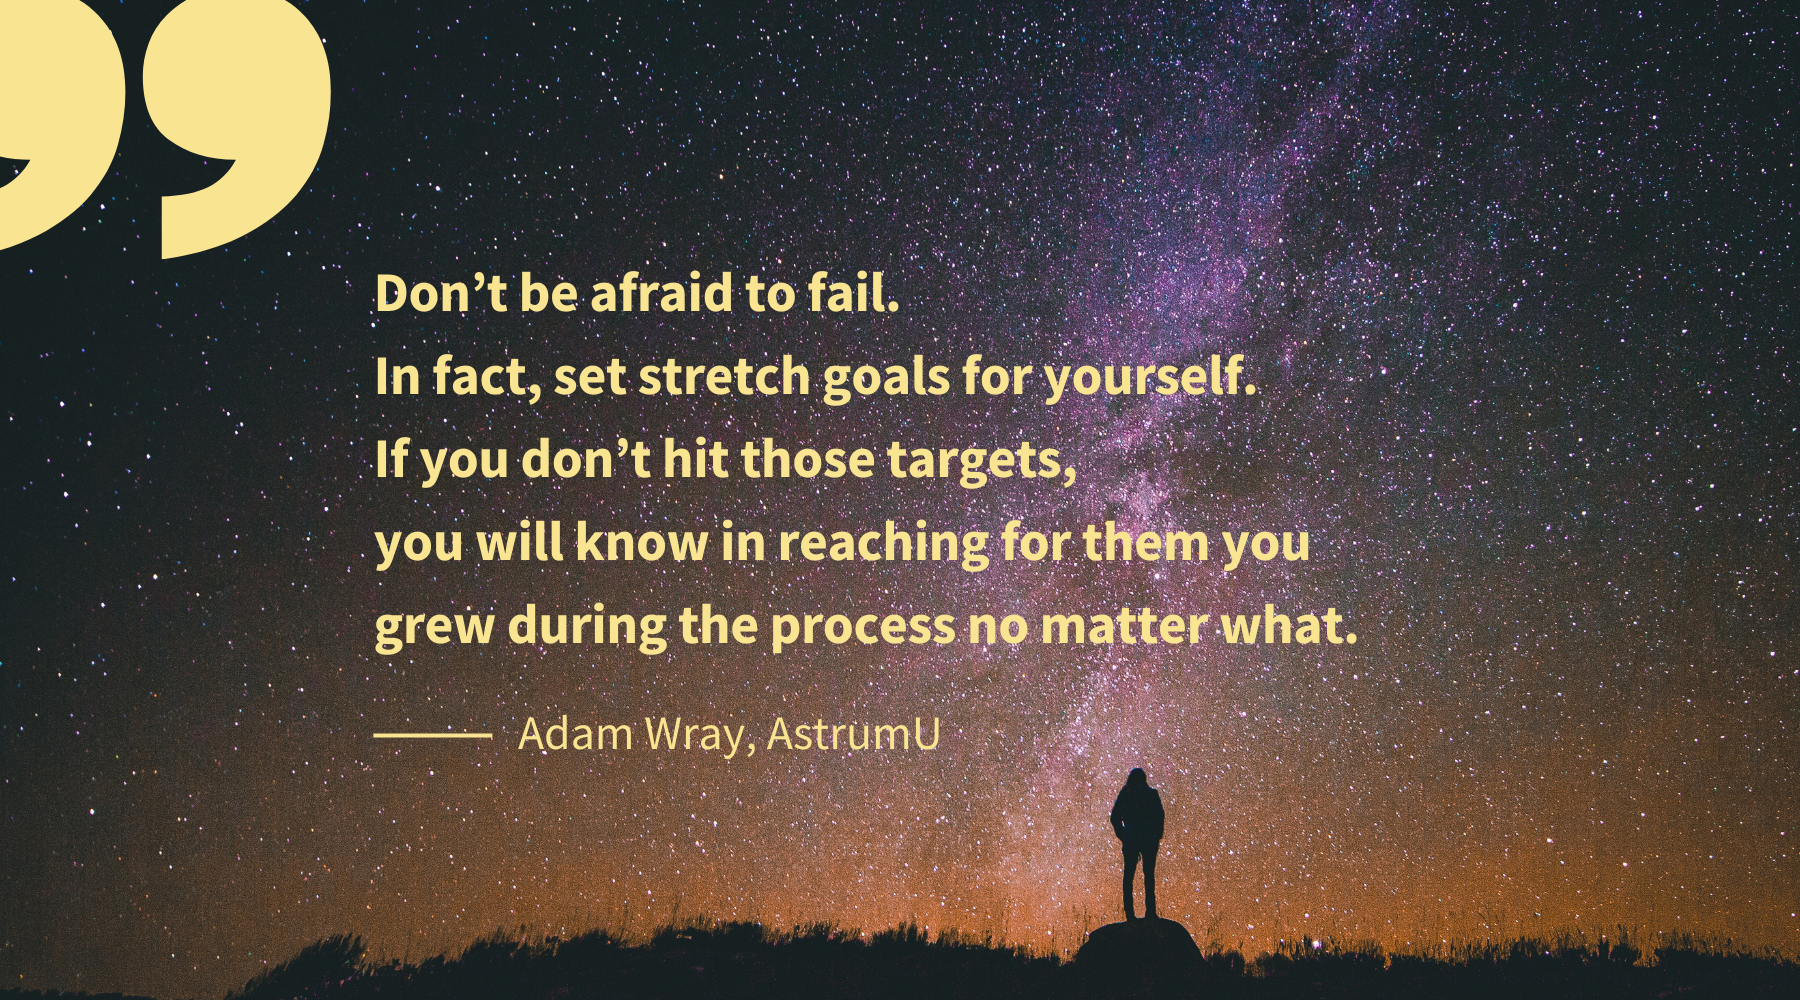 Don’t be afraid to fail. In fact, set stretch goals for yourself. If you don’t hit those targets, you will know in reaching for them you grew during the process no matter what.